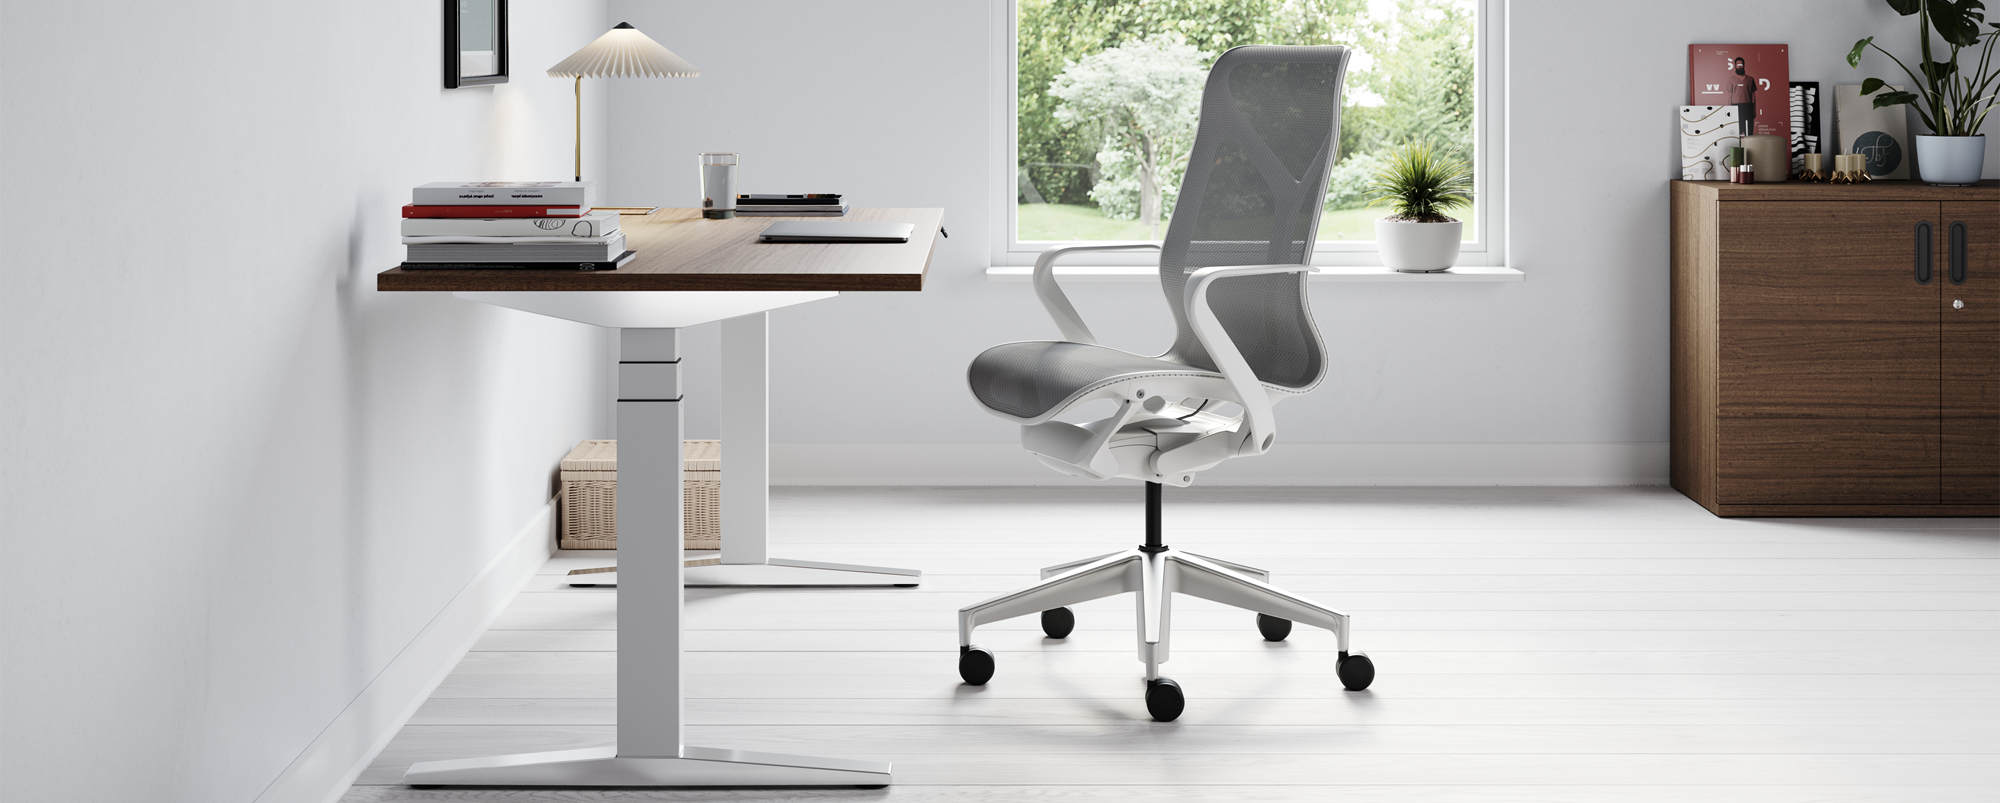 Grey and white Cosm chair next to a Ratio sit stand desk in a home office setting